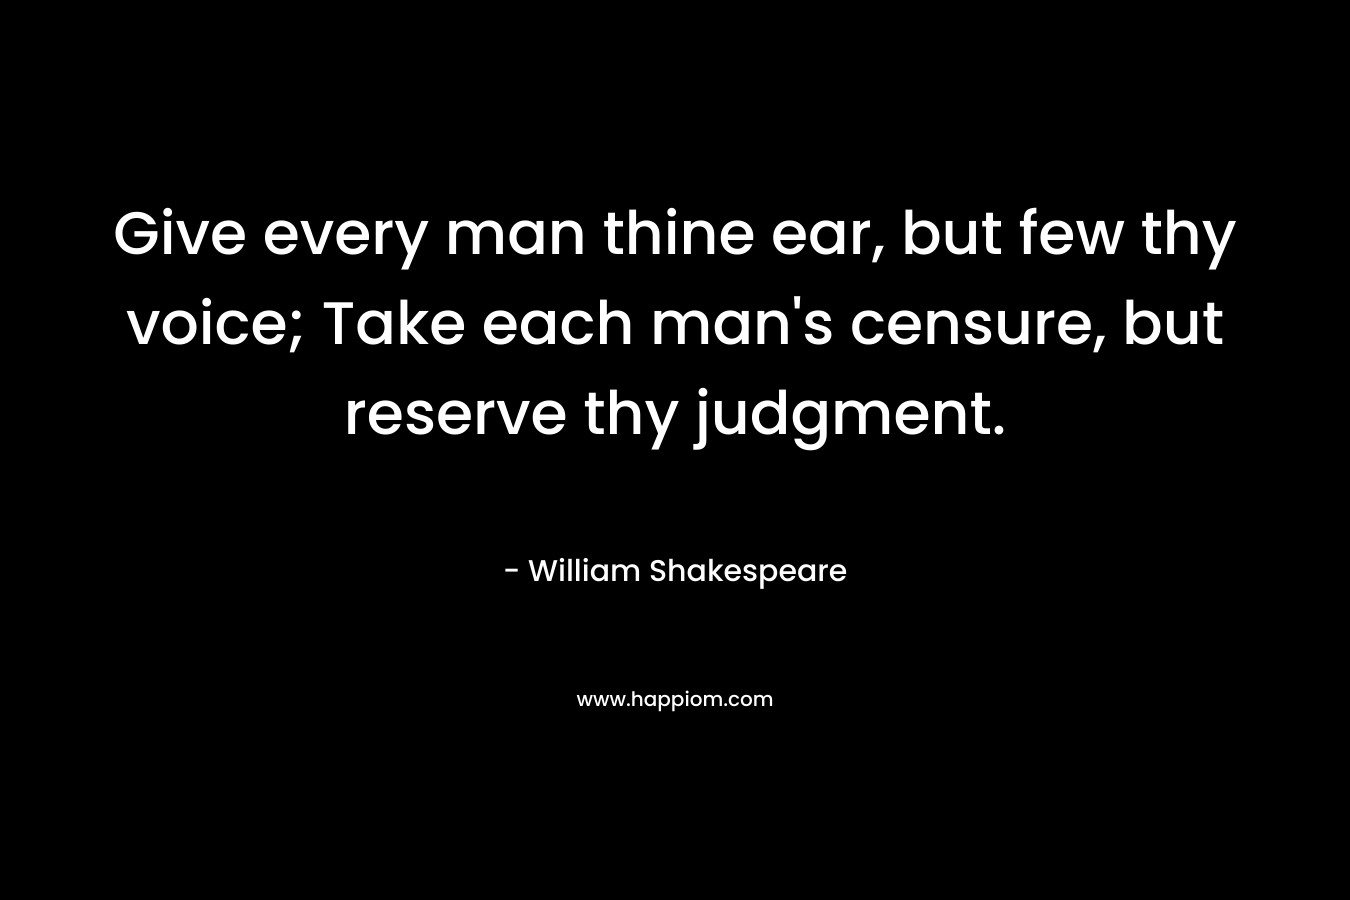 Give every man thine ear, but few thy voice; Take each man's censure, but reserve thy judgment.